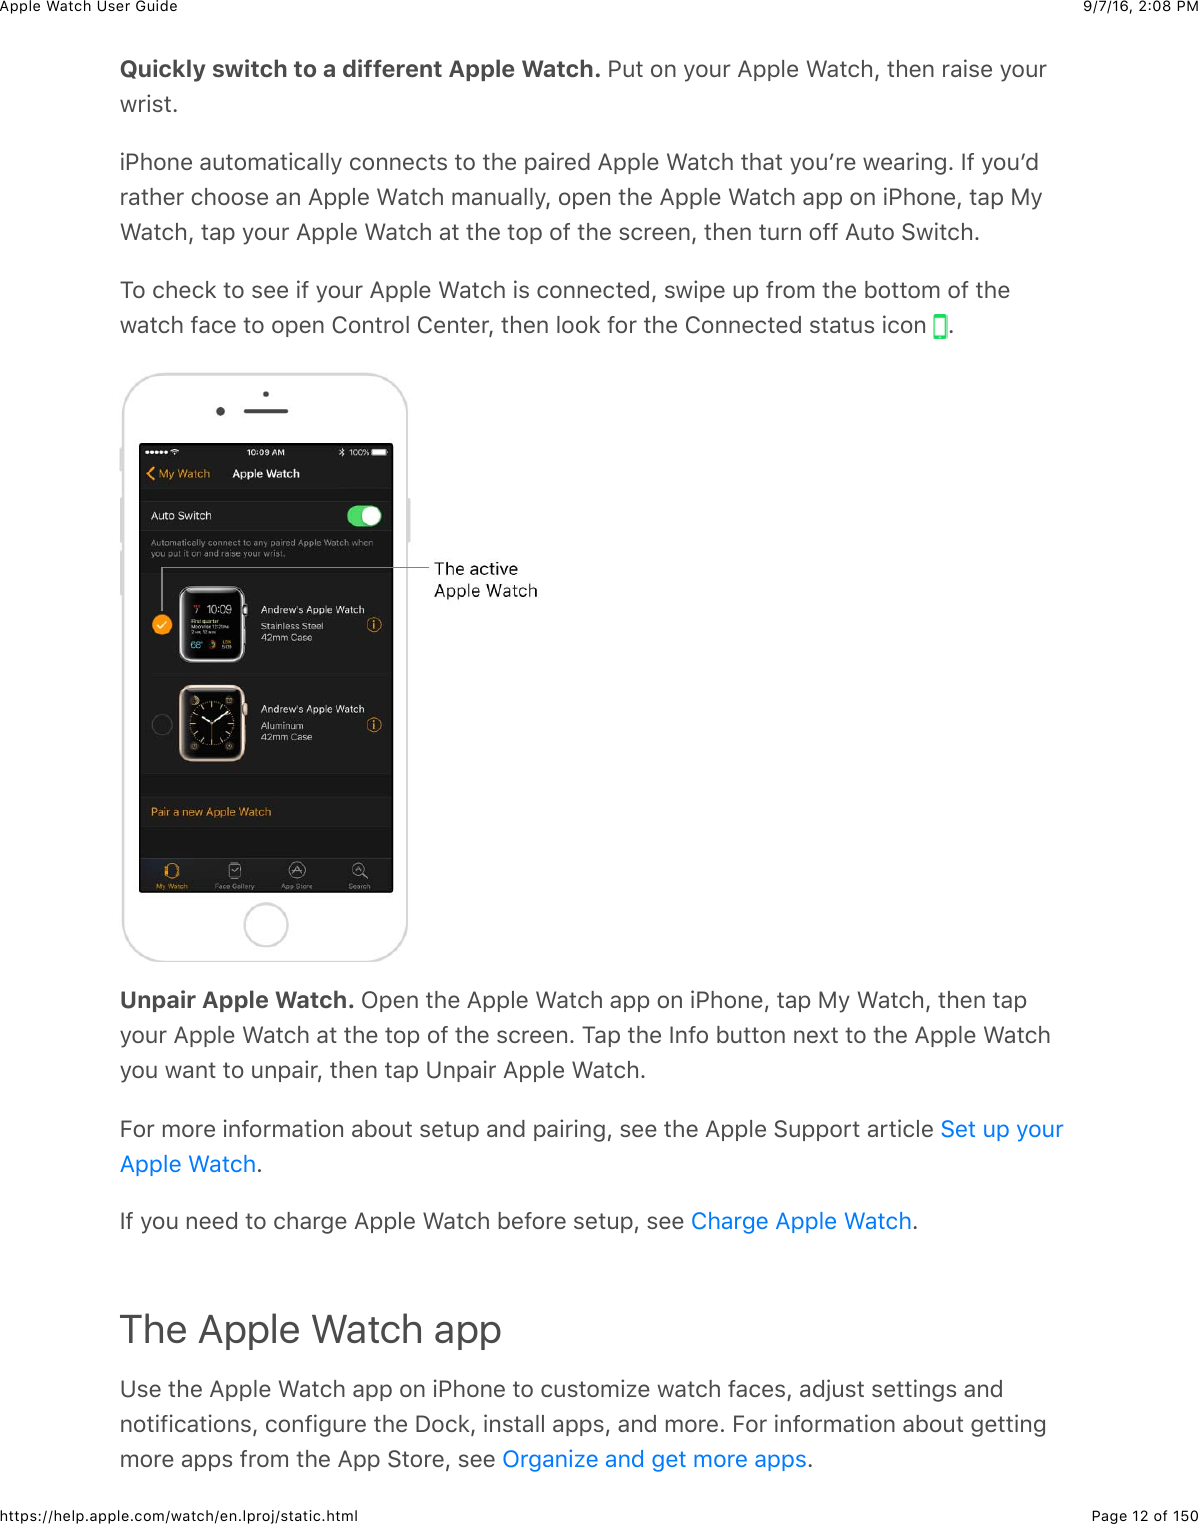 9/7/16, 2)08 PMApple Watch User GuidePage 12 of 150https://help.apple.com/watch/en.lproj/static.htmlQuickly switch to a different Apple Watch. G43&amp;#,&amp;/#4*&amp;=22&quot;%&amp;&gt;&apos;3()J&amp;3)%,&amp;*&apos;+$%&amp;/#4*7*+$3C+G)#,%&amp;&apos;43#5&apos;3+(&apos;&quot;&quot;/&amp;(#,,%(3$&amp;3#&amp;3)%&amp;2&apos;+*%0&amp;=22&quot;%&amp;&gt;&apos;3()&amp;3)&apos;3&amp;/#4W*%&amp;7%&apos;*+,-C&amp;Y@&amp;/#4W0*&apos;3)%*&amp;()##$%&amp;&apos;,&amp;=22&quot;%&amp;&gt;&apos;3()&amp;5&apos;,4&apos;&quot;&quot;/J&amp;#2%,&amp;3)%&amp;=22&quot;%&amp;&gt;&apos;3()&amp;&apos;22&amp;#,&amp;+G)#,%J&amp;3&apos;2&amp;F/&gt;&apos;3()J&amp;3&apos;2&amp;/#4*&amp;=22&quot;%&amp;&gt;&apos;3()&amp;&apos;3&amp;3)%&amp;3#2&amp;#@&amp;3)%&amp;$(*%%,J&amp;3)%,&amp;34*,&amp;#@@&amp;=43#&amp;67+3()C1#&amp;()%(8&amp;3#&amp;$%%&amp;+@&amp;/#4*&amp;=22&quot;%&amp;&gt;&apos;3()&amp;+$&amp;(#,,%(3%0J&amp;$7+2%&amp;42&amp;@*#5&amp;3)%&amp;B#33#5&amp;#@&amp;3)%7&apos;3()&amp;@&apos;(%&amp;3#&amp;#2%,&amp;!#,3*#&quot;&amp;!%,3%*J&amp;3)%,&amp;&quot;##8&amp;@#*&amp;3)%&amp;!#,,%(3%0&amp;$3&apos;34$&amp;+(#,&amp; CUnpair Apple Watch. L2%,&amp;3)%&amp;=22&quot;%&amp;&gt;&apos;3()&amp;&apos;22&amp;#,&amp;+G)#,%J&amp;3&apos;2&amp;F/&amp;&gt;&apos;3()J&amp;3)%,&amp;3&apos;2/#4*&amp;=22&quot;%&amp;&gt;&apos;3()&amp;&apos;3&amp;3)%&amp;3#2&amp;#@&amp;3)%&amp;$(*%%,C&amp;1&apos;2&amp;3)%&amp;Y,@#&amp;B433#,&amp;,%U3&amp;3#&amp;3)%&amp;=22&quot;%&amp;&gt;&apos;3()/#4&amp;7&apos;,3&amp;3#&amp;4,2&apos;+*J&amp;3)%,&amp;3&apos;2&amp;K,2&apos;+*&amp;=22&quot;%&amp;&gt;&apos;3()CE#*&amp;5#*%&amp;+,@#*5&apos;3+#,&amp;&apos;B#43&amp;$%342&amp;&apos;,0&amp;2&apos;+*+,-J&amp;$%%&amp;3)%&amp;=22&quot;%&amp;6422#*3&amp;&apos;*3+(&quot;%&amp;CY@&amp;/#4&amp;,%%0&amp;3#&amp;()&apos;*-%&amp;=22&quot;%&amp;&gt;&apos;3()&amp;B%@#*%&amp;$%342J&amp;$%%&amp; CThe Apple Watch appK$%&amp;3)%&amp;=22&quot;%&amp;&gt;&apos;3()&amp;&apos;22&amp;#,&amp;+G)#,%&amp;3#&amp;(4$3#5+N%&amp;7&apos;3()&amp;@&apos;(%$J&amp;&apos;0O4$3&amp;$%33+,-$&amp;&apos;,0,#3+@+(&apos;3+#,$J&amp;(#,@+-4*%&amp;3)%&amp;I#(8J&amp;+,$3&apos;&quot;&quot;&amp;&apos;22$J&amp;&apos;,0&amp;5#*%C&amp;E#*&amp;+,@#*5&apos;3+#,&amp;&apos;B#43&amp;-%33+,-5#*%&amp;&apos;22$&amp;@*#5&amp;3)%&amp;=22&amp;63#*%J&amp;$%%&amp; C6%3&amp;42&amp;/#4*=22&quot;%&amp;&gt;&apos;3()!)&apos;*-%&amp;=22&quot;%&amp;&gt;&apos;3()L*-&apos;,+N%&amp;&apos;,0&amp;-%3&amp;5#*%&amp;&apos;22$